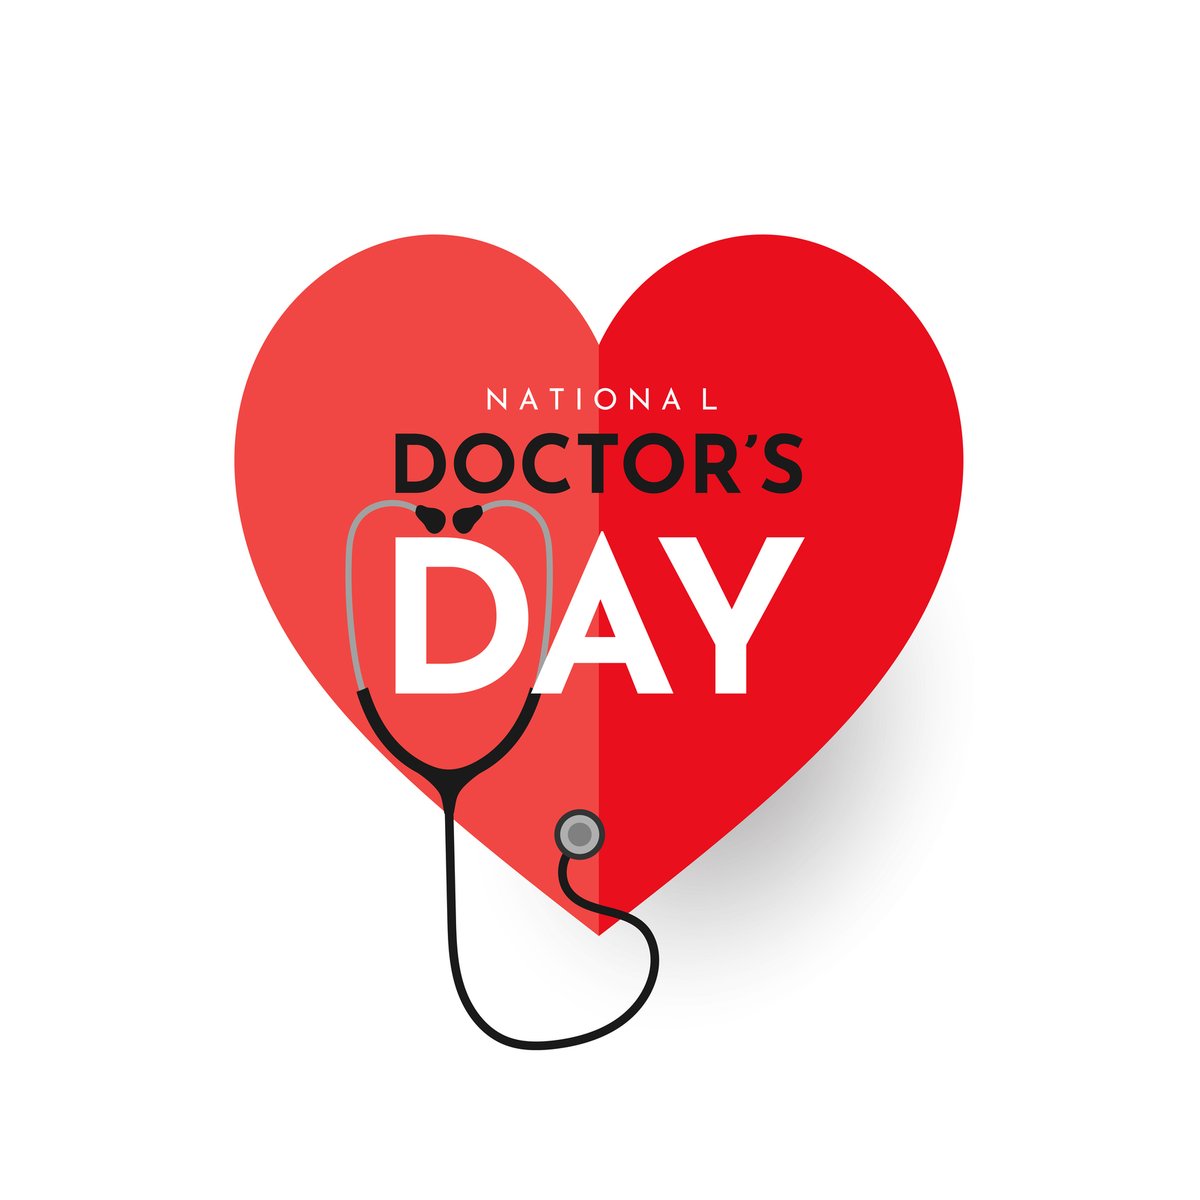 Tomorrow is #NationalDoctorsDay. We want to pay tribute to all of our amazing physicians and honor their dedication, skill and unwavering commitment to providing high-quality care to our patients and the communities we serve. Thank you!